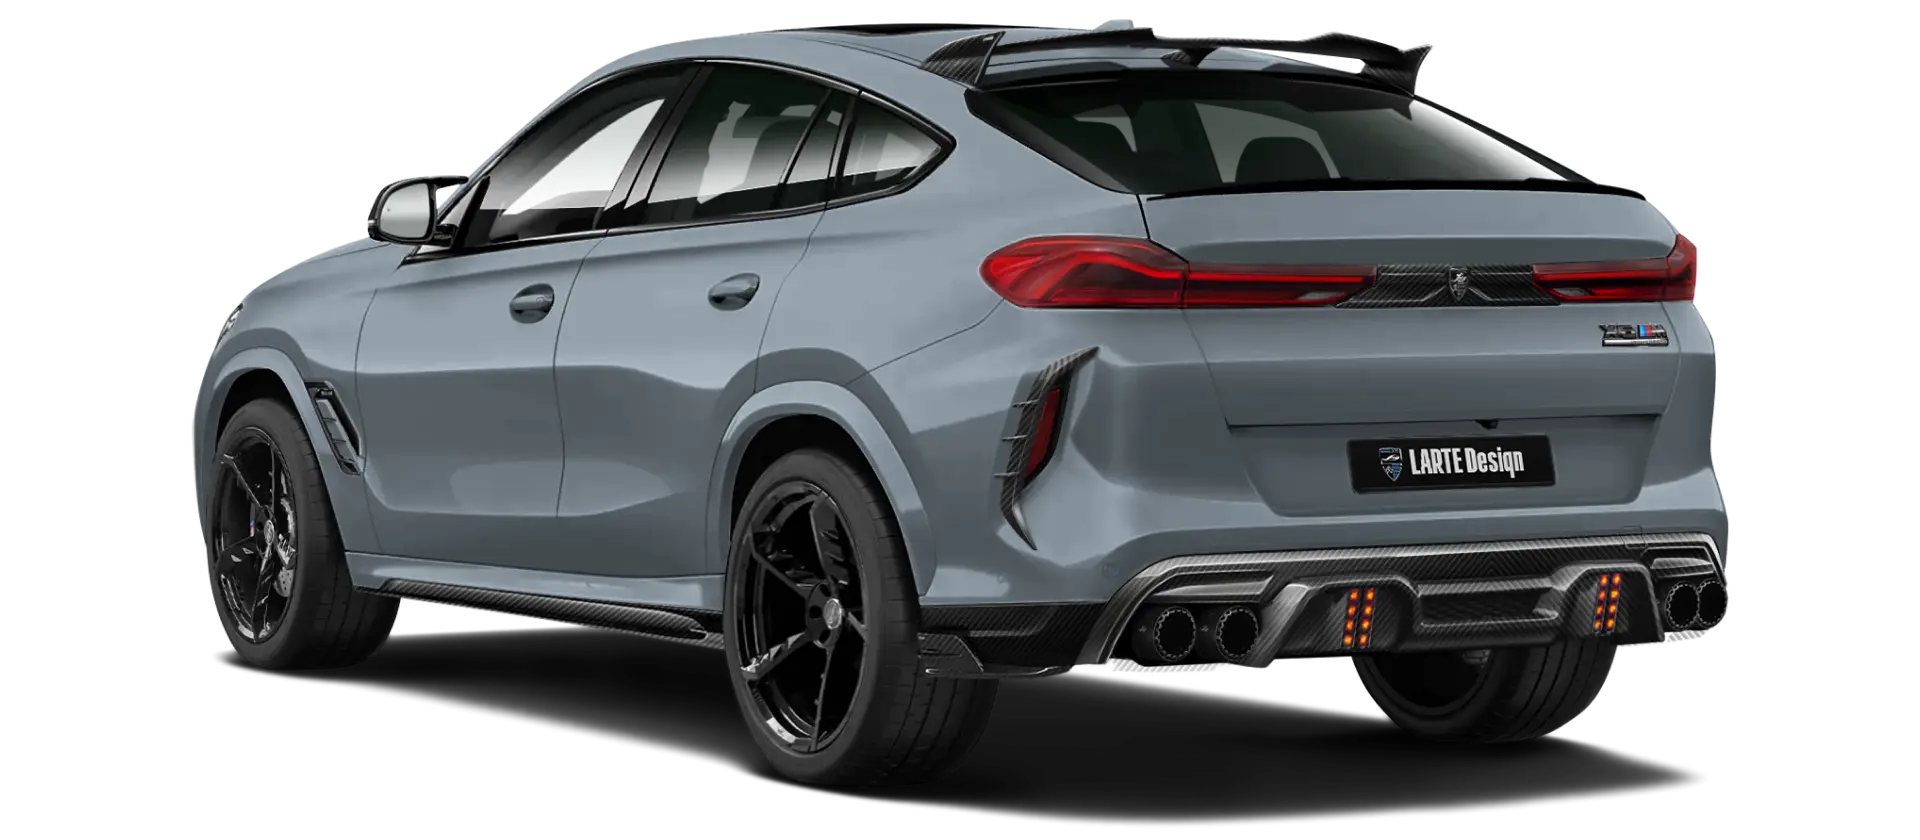 BMW X6M F96 LCI 2023 with carbon body kit: back view shown in Frosty clean gray